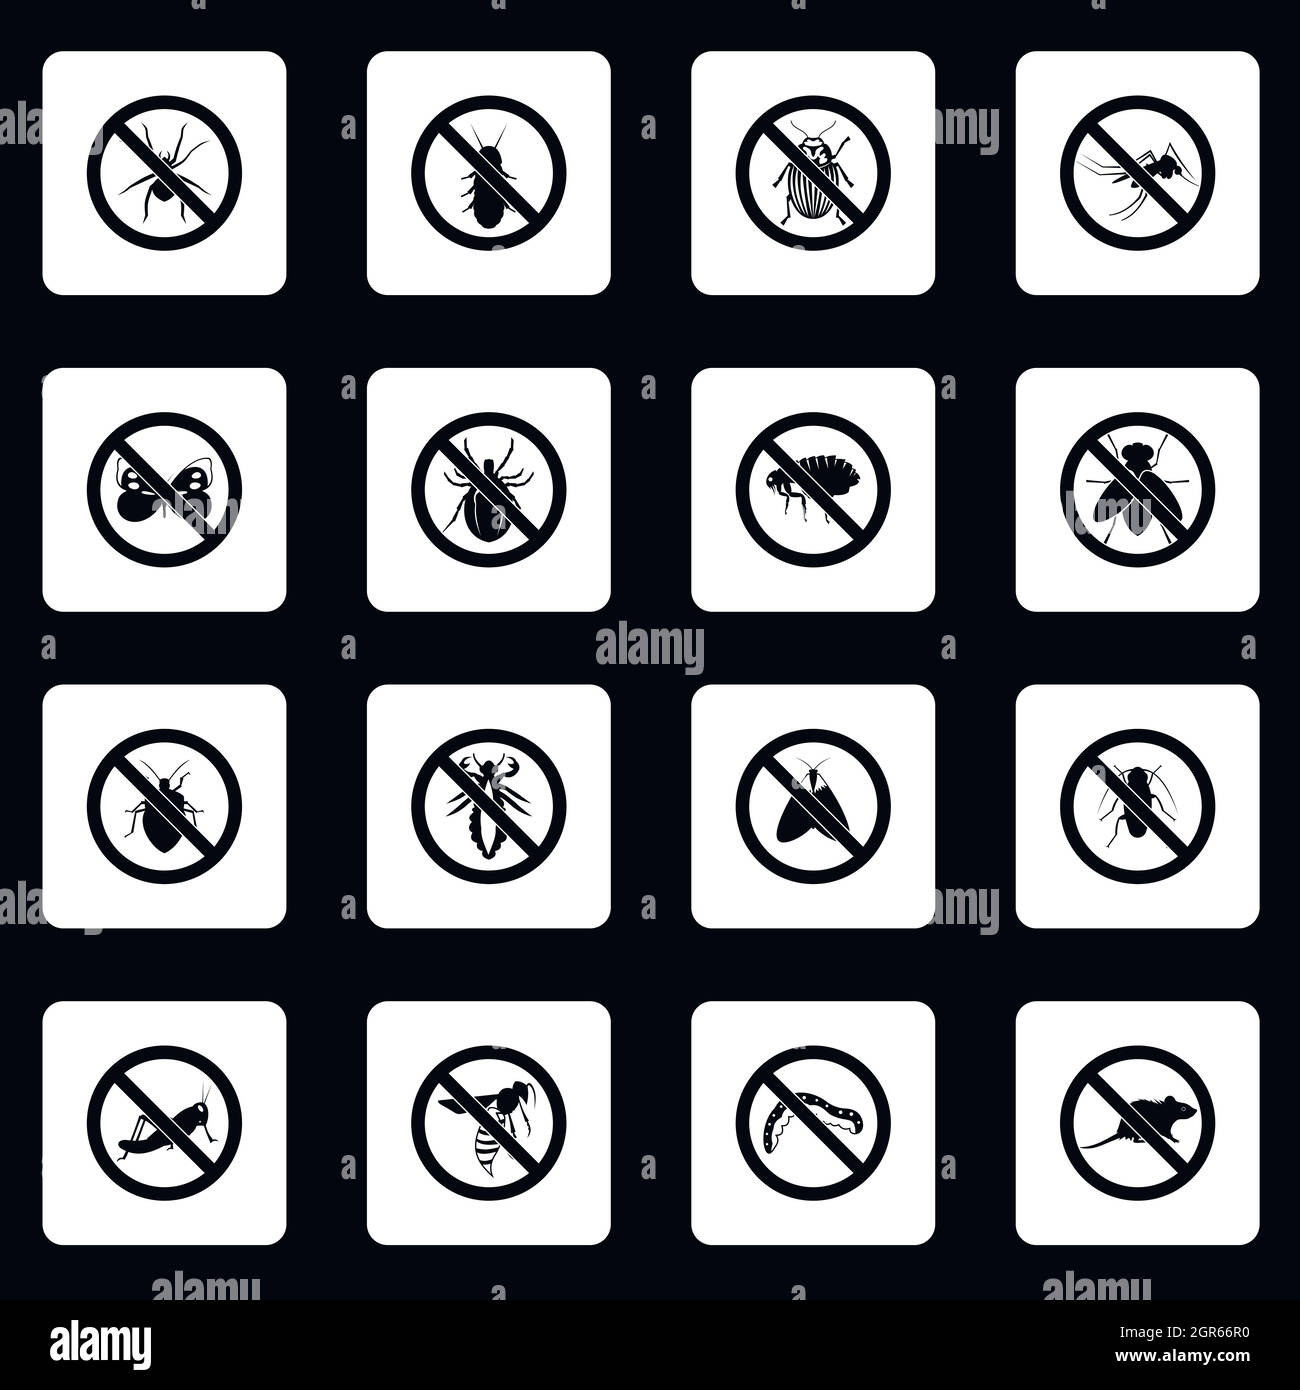 No insects sign icons set, simple style Stock Vector